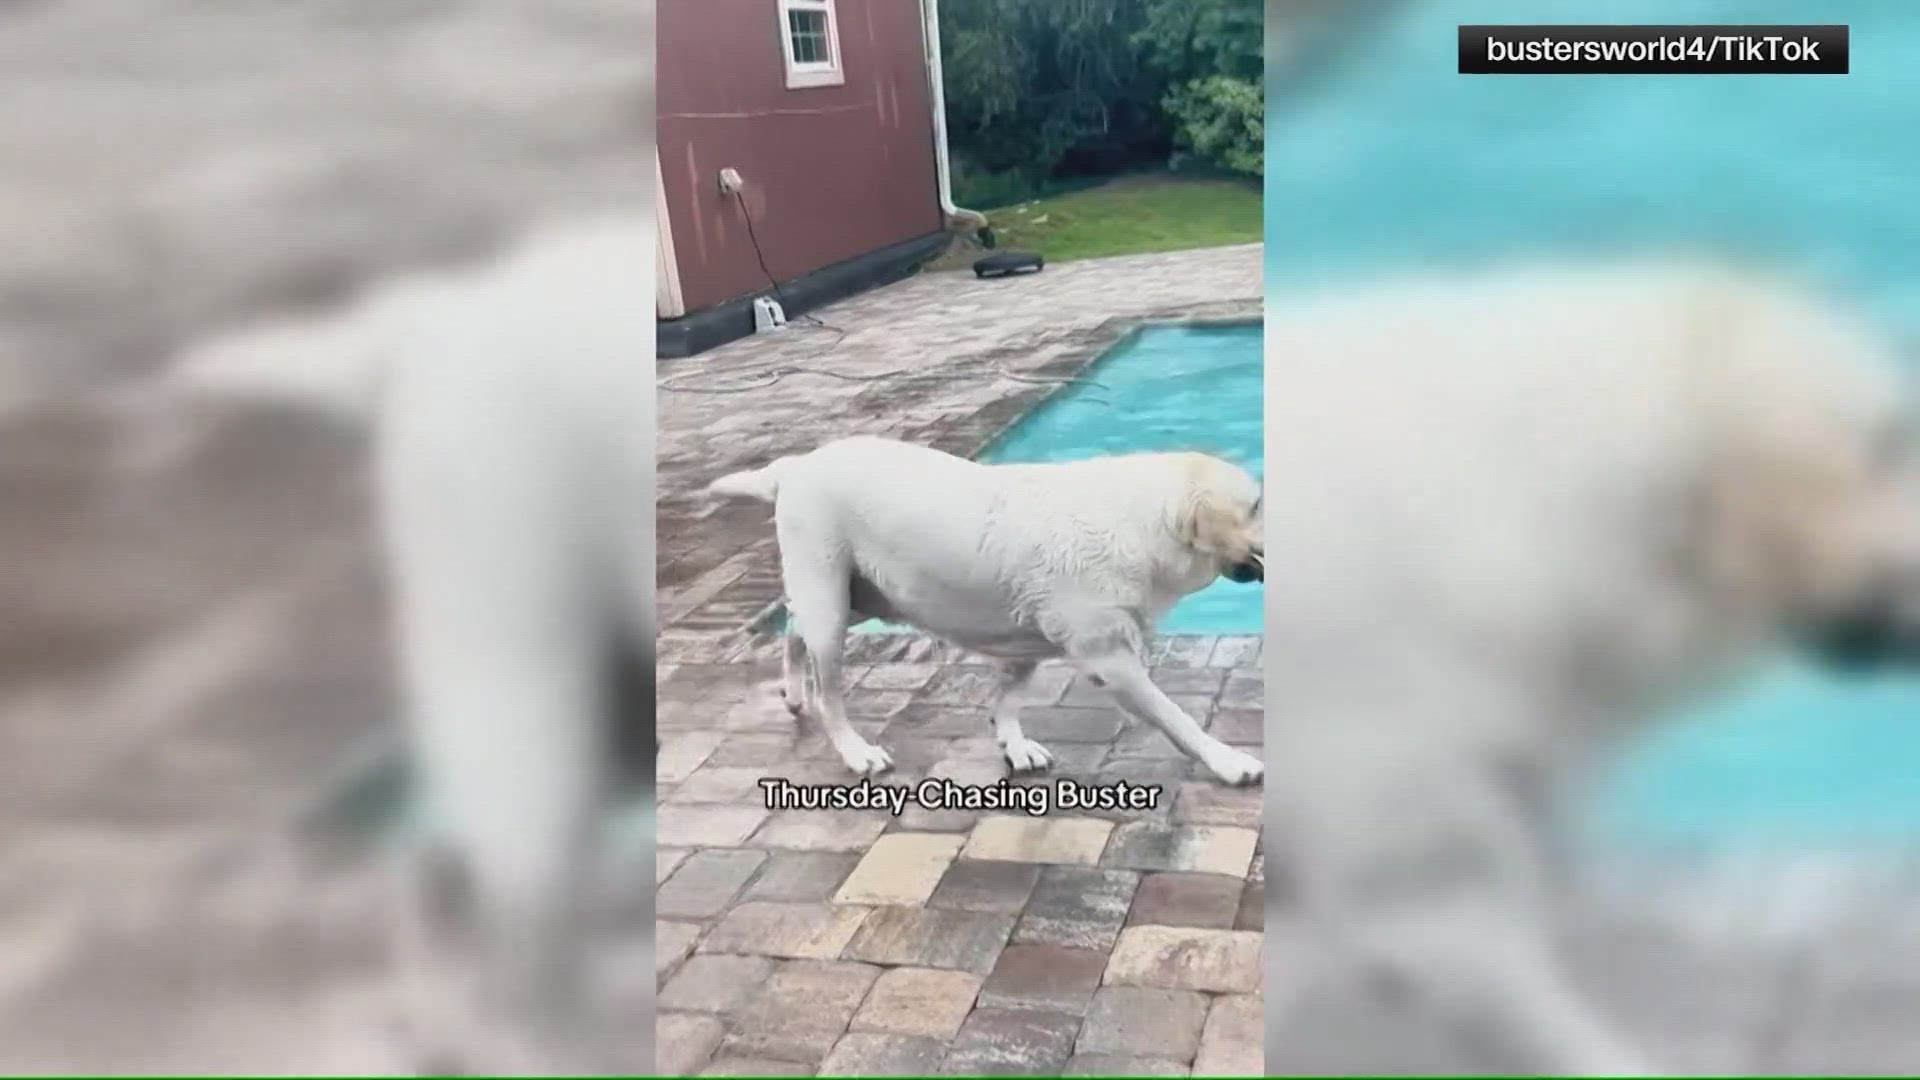 The woman said she was trying to get Buster out of the pool so she could make a dinner reservation.